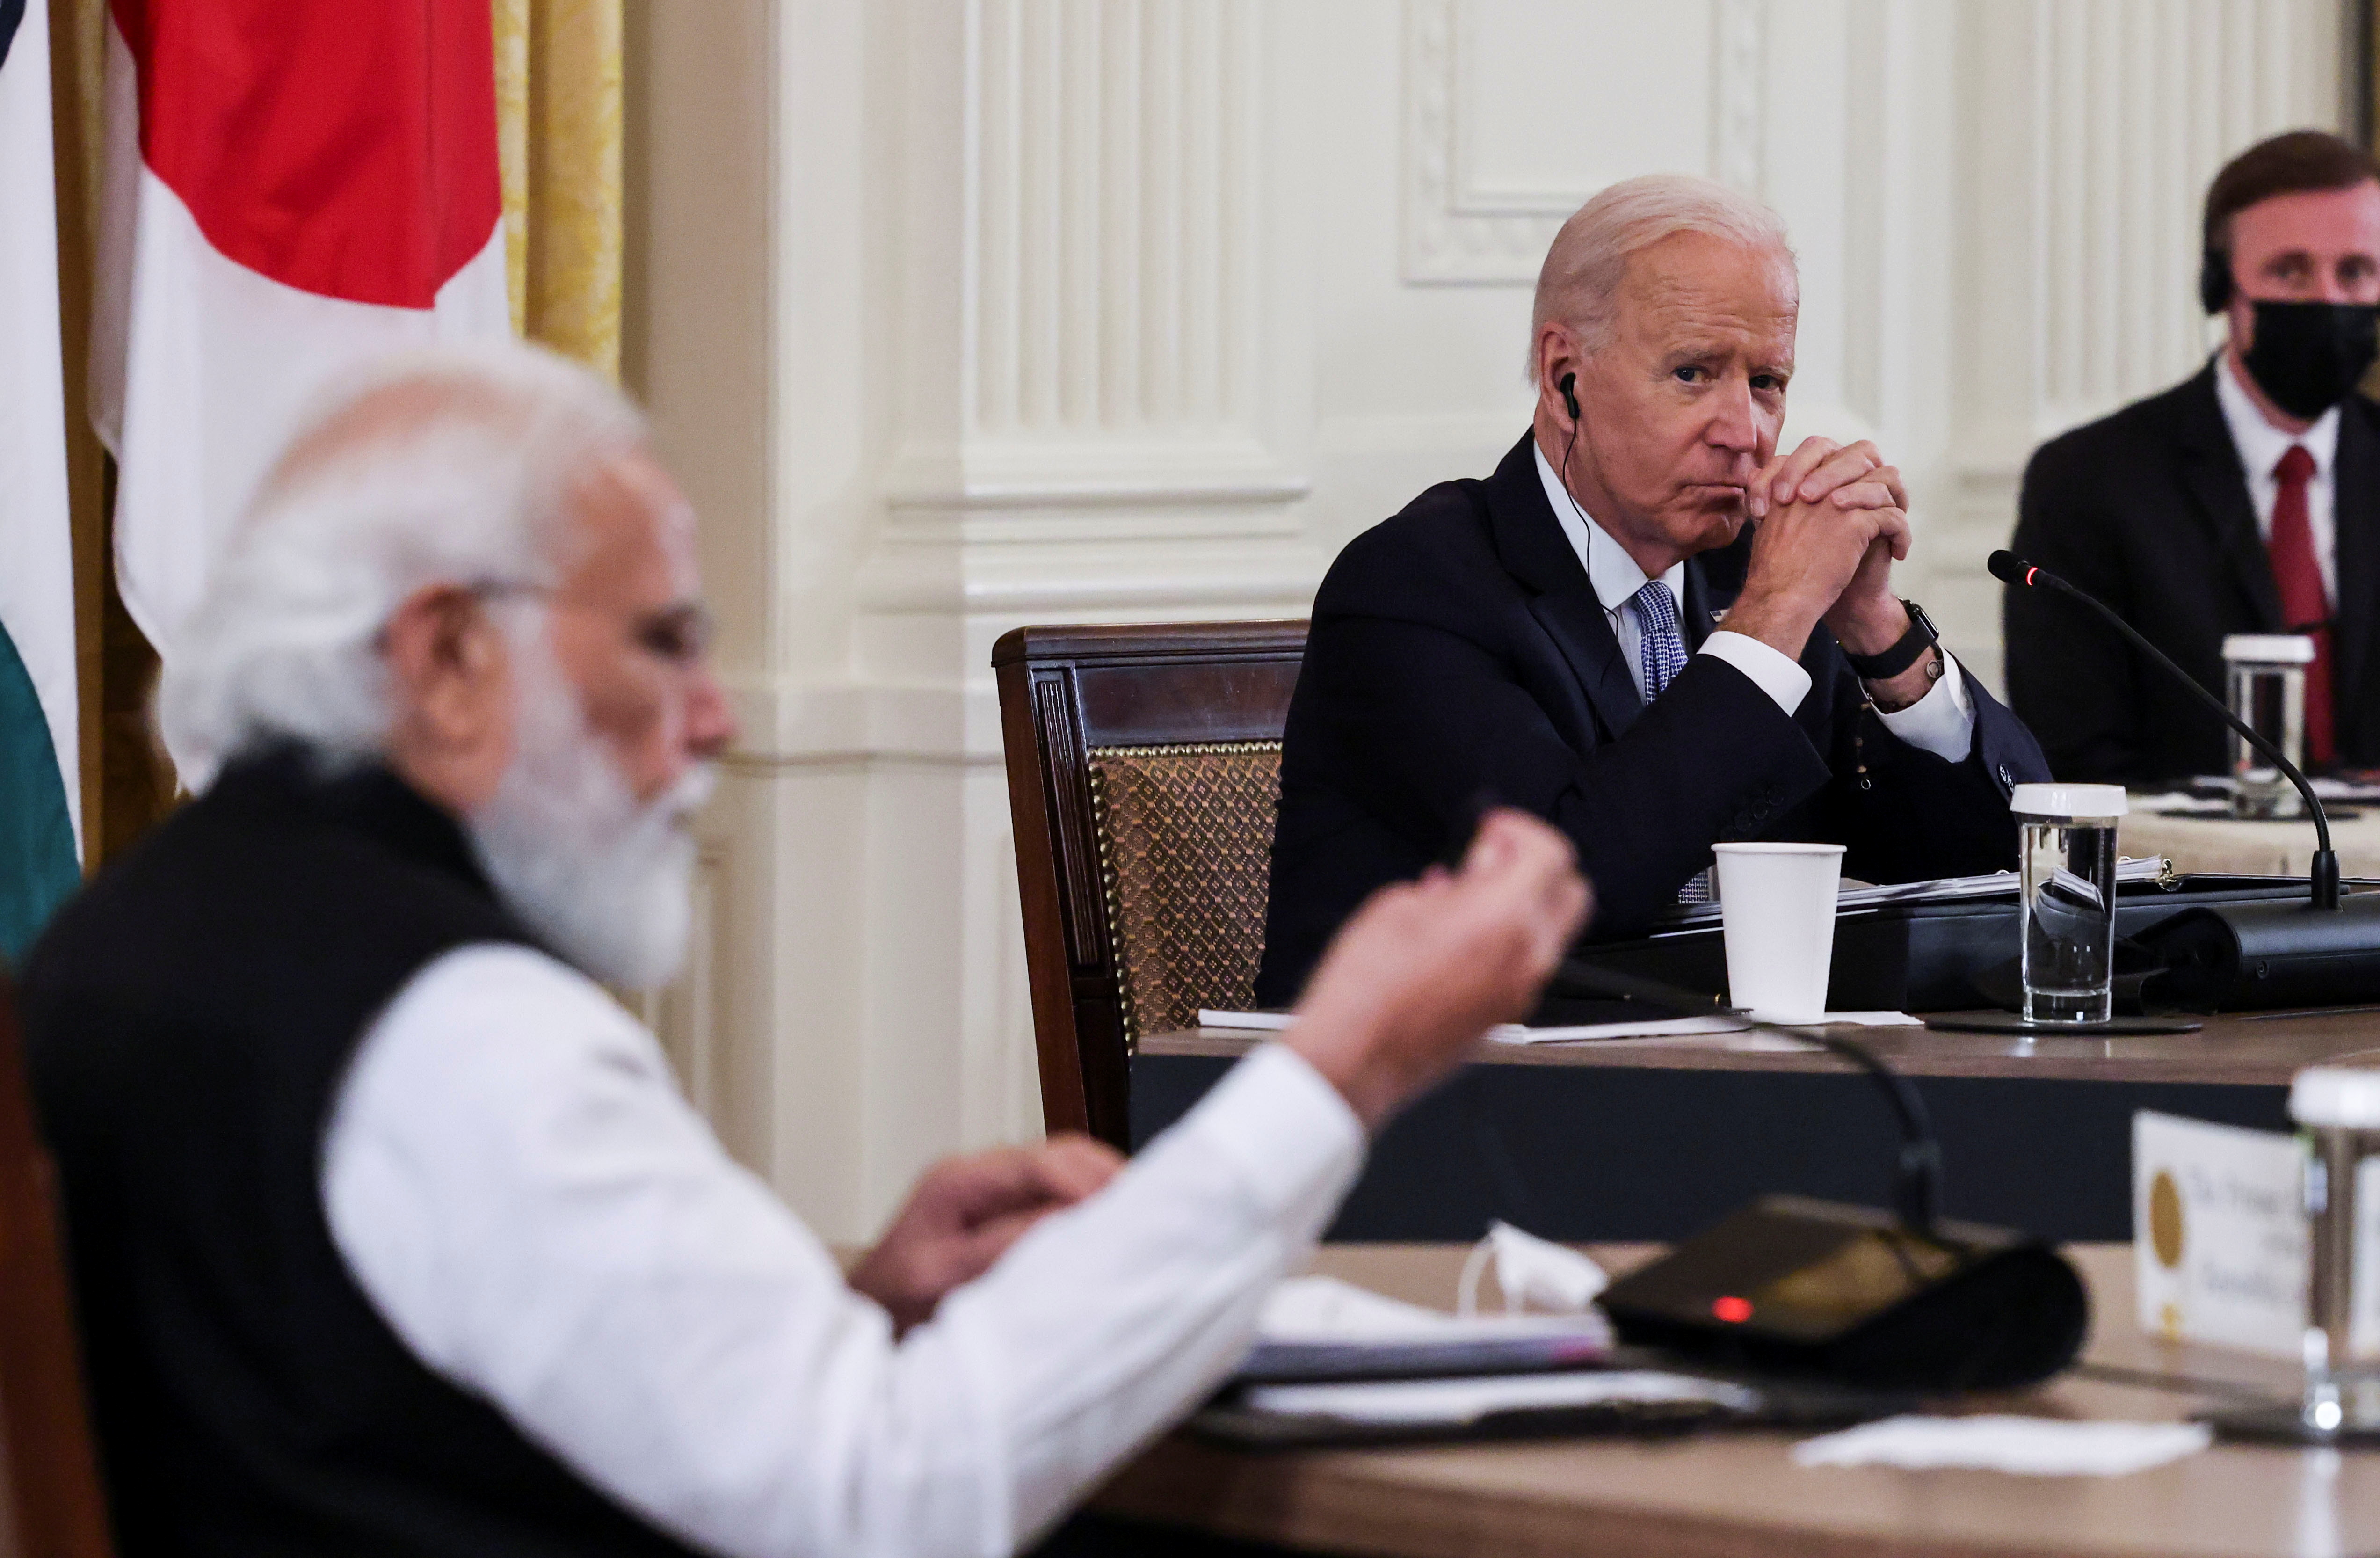 U.S. President Biden hosts 'Quad nations' meeting at the Leaders' Summit of the Quadrilateral Framework at the White House in Washington